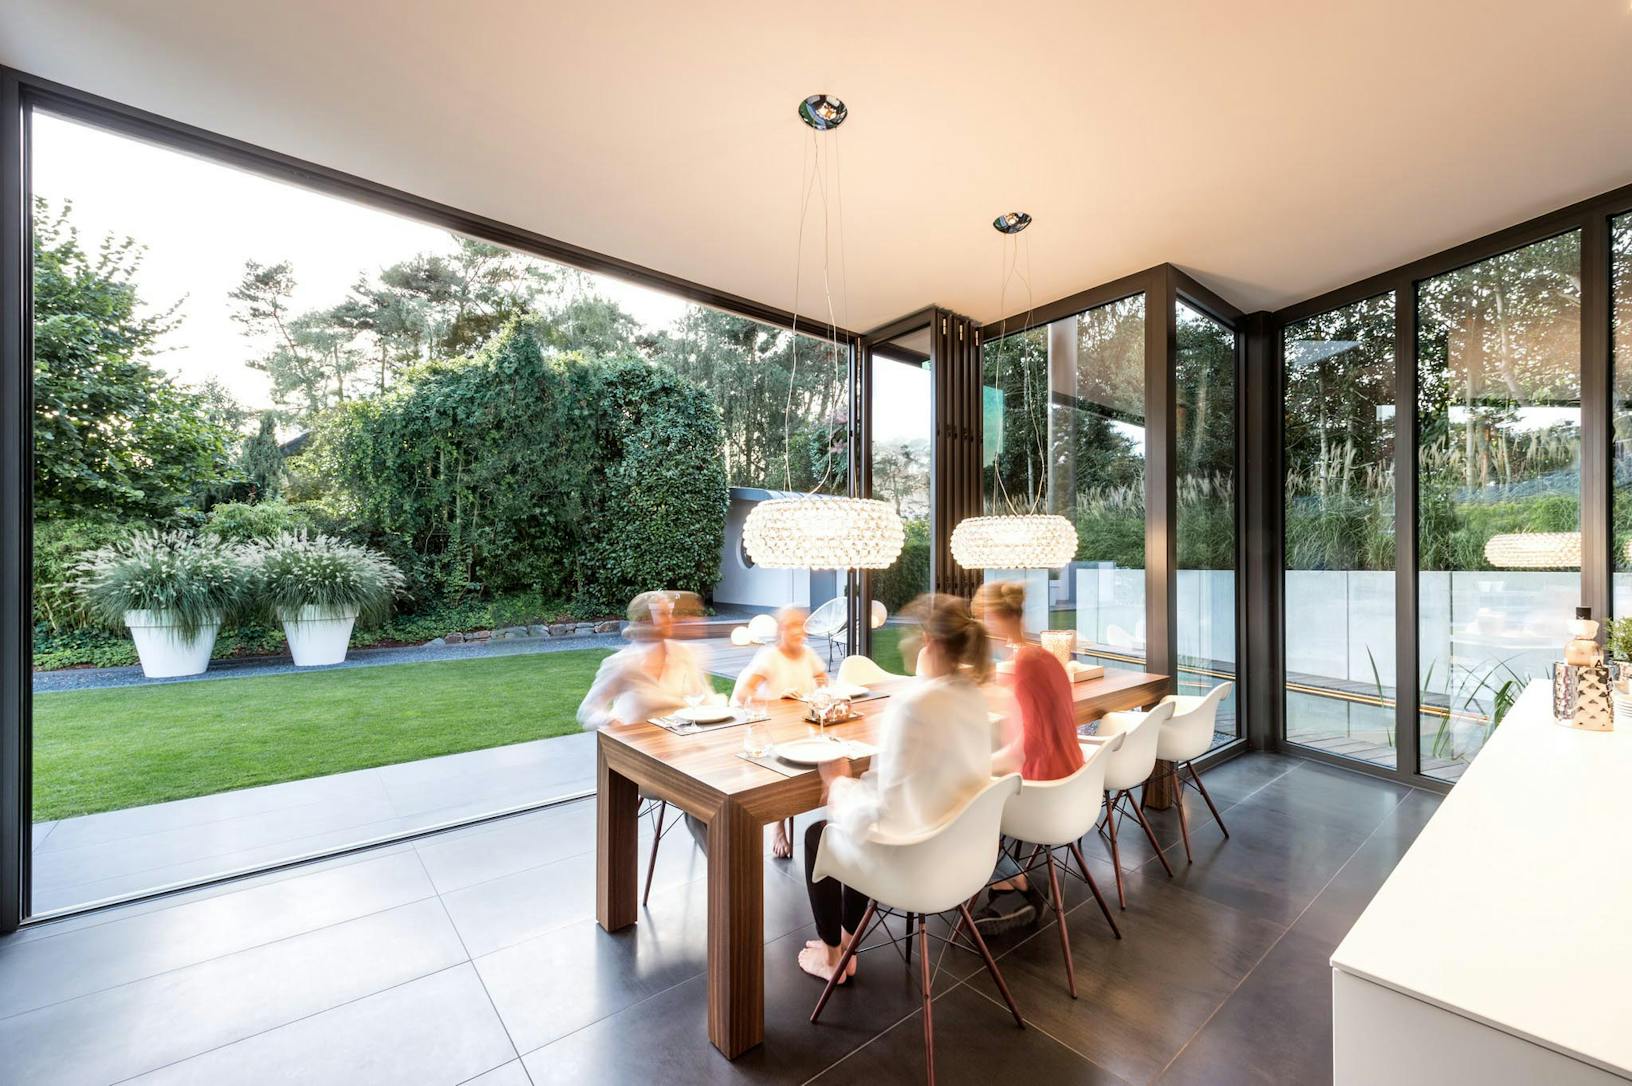 A group of people sitting around a dining table and opening patio folding doors